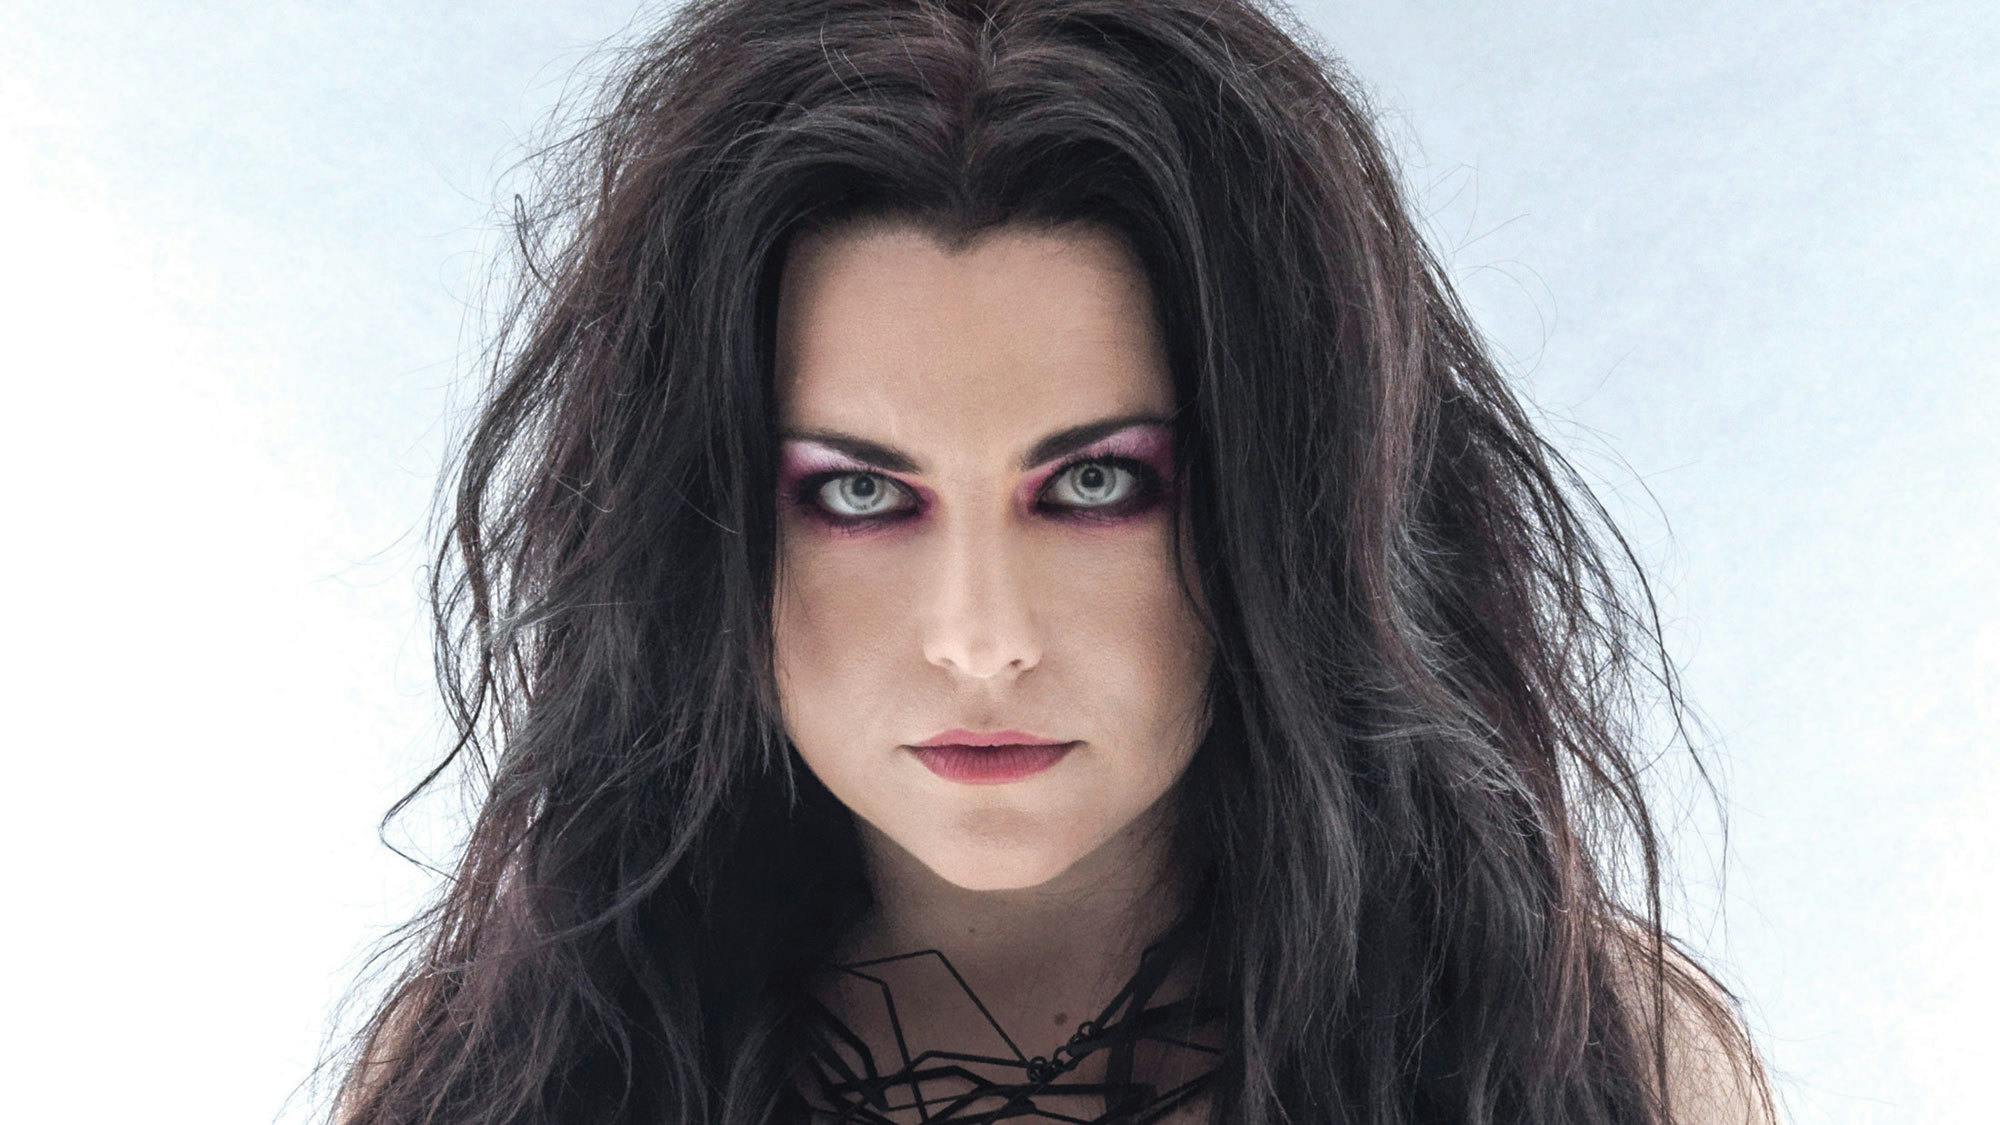 9 Things We Learned From Evanescence's Amy Lee's Reddit AMA